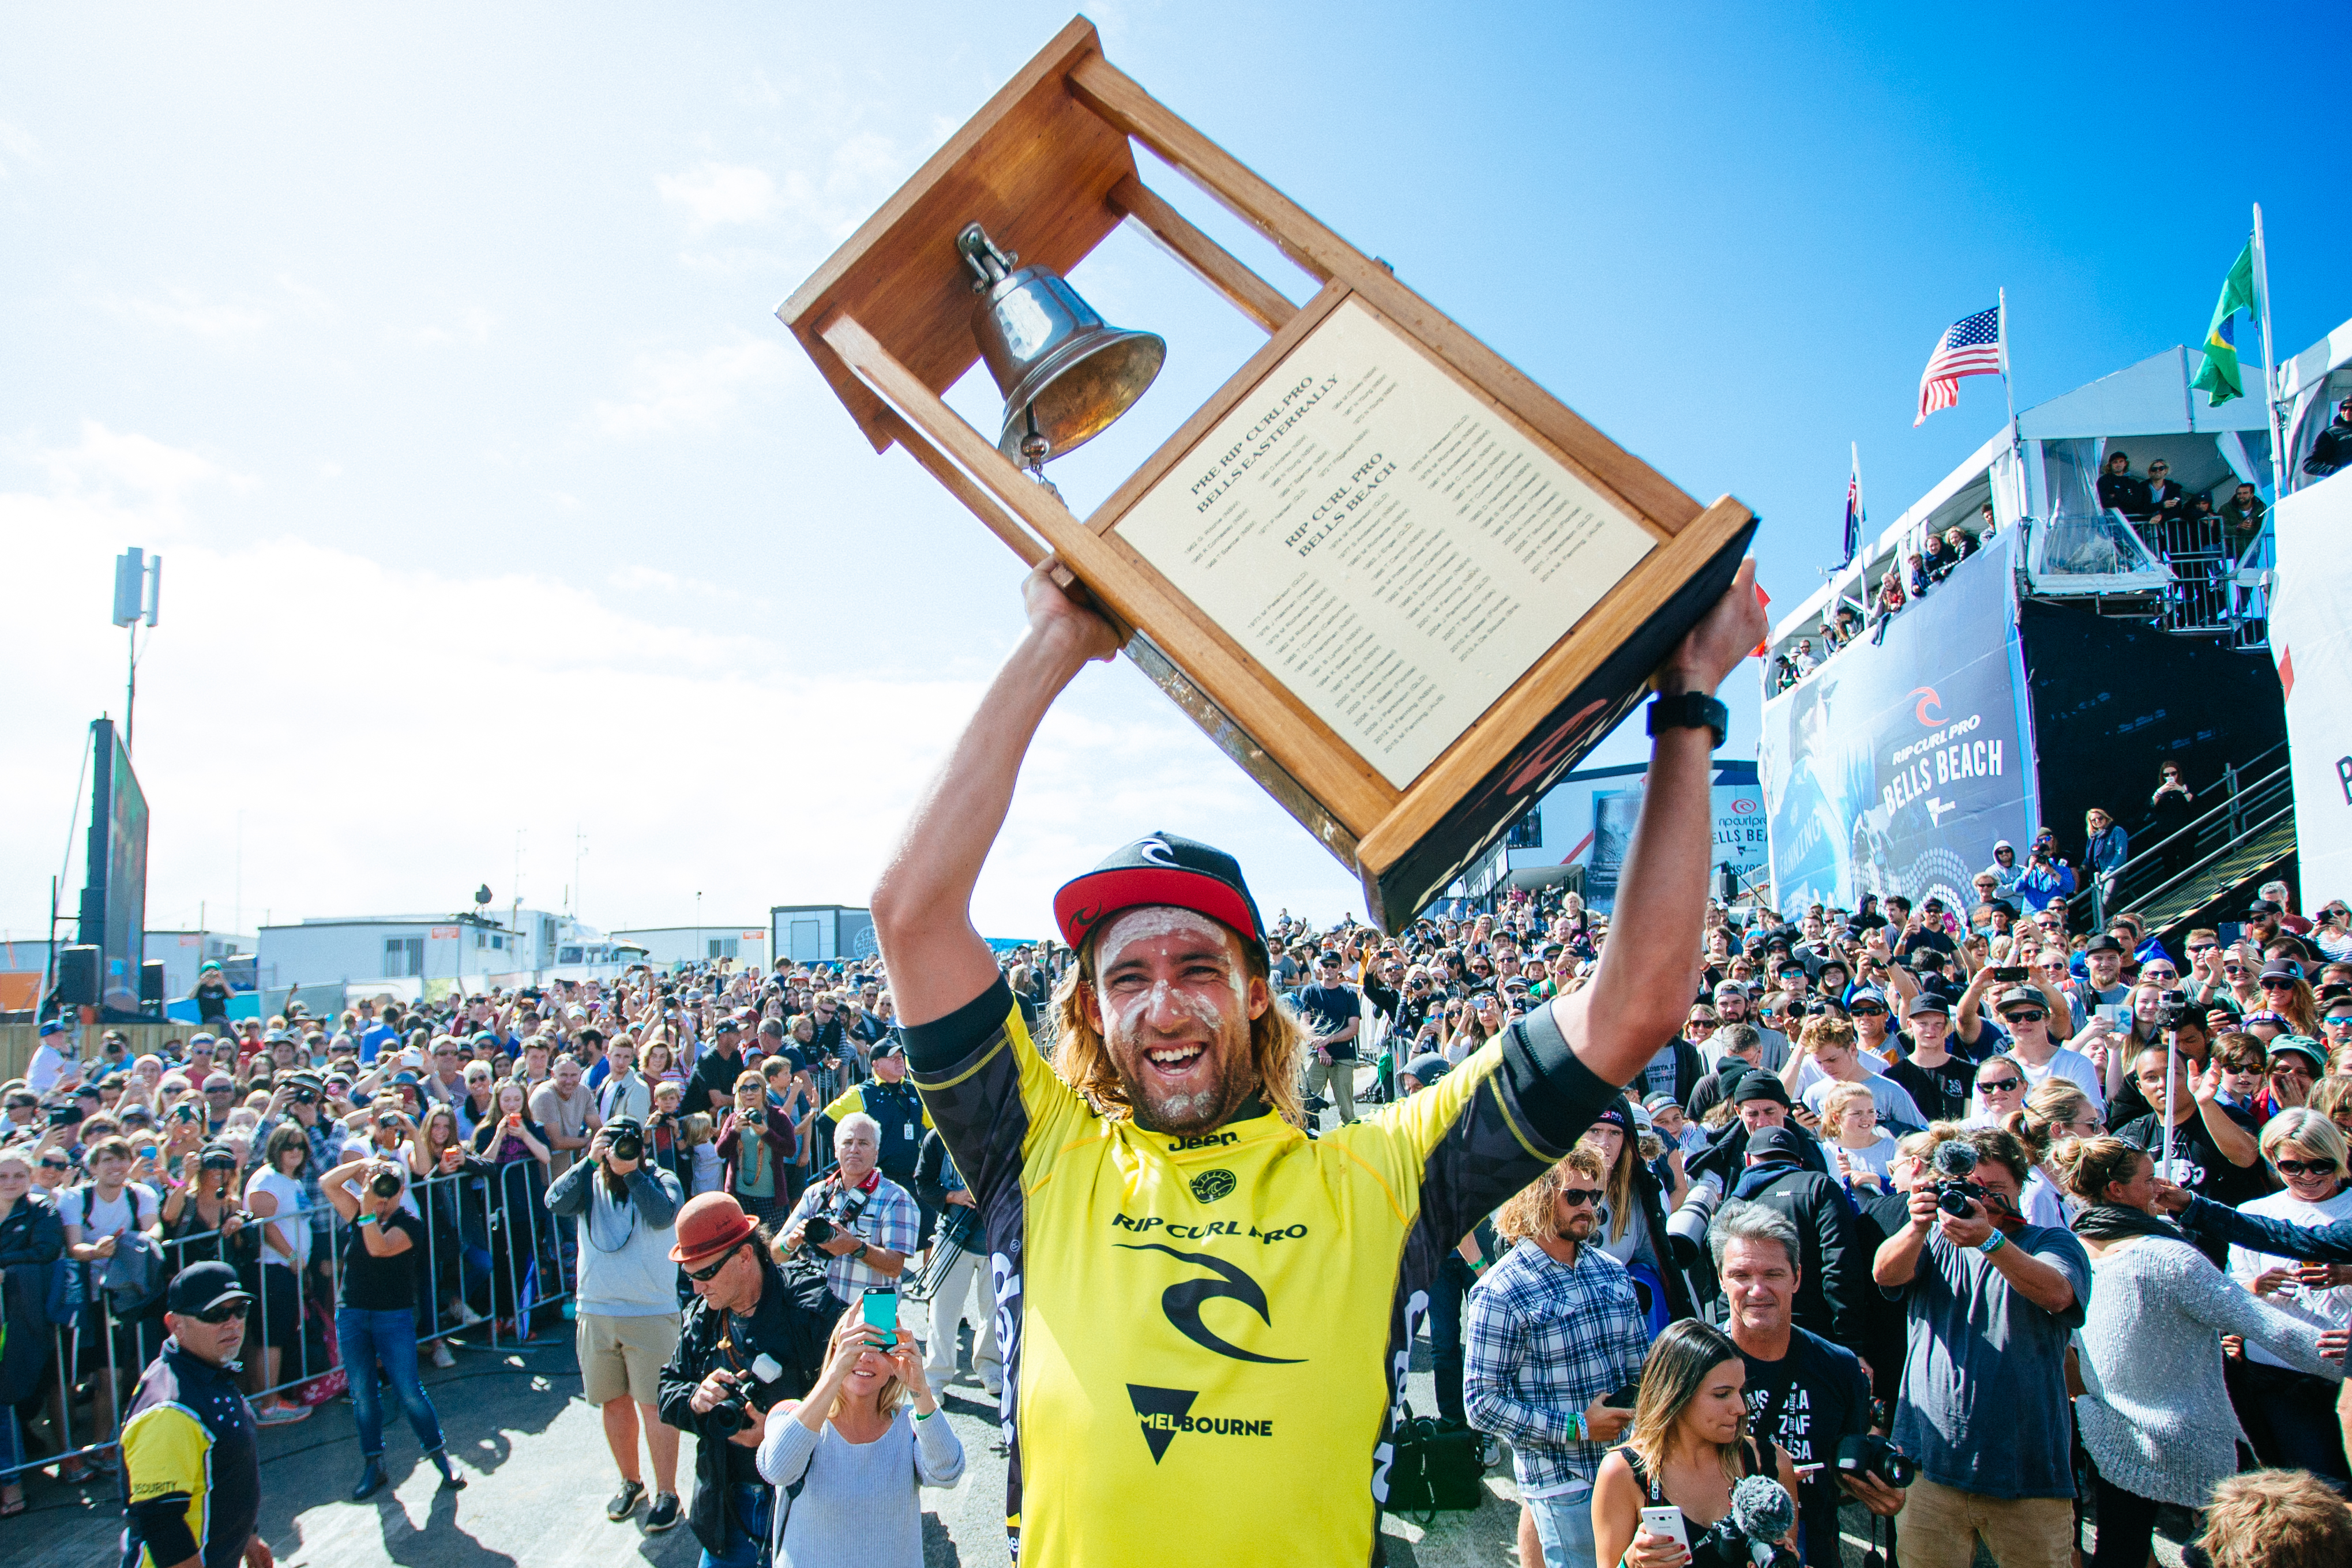 Matt Wilkinson (AUS) claims his first victory at the Rip Curl Pro Bells Beach.  Image: WSL / Sloane